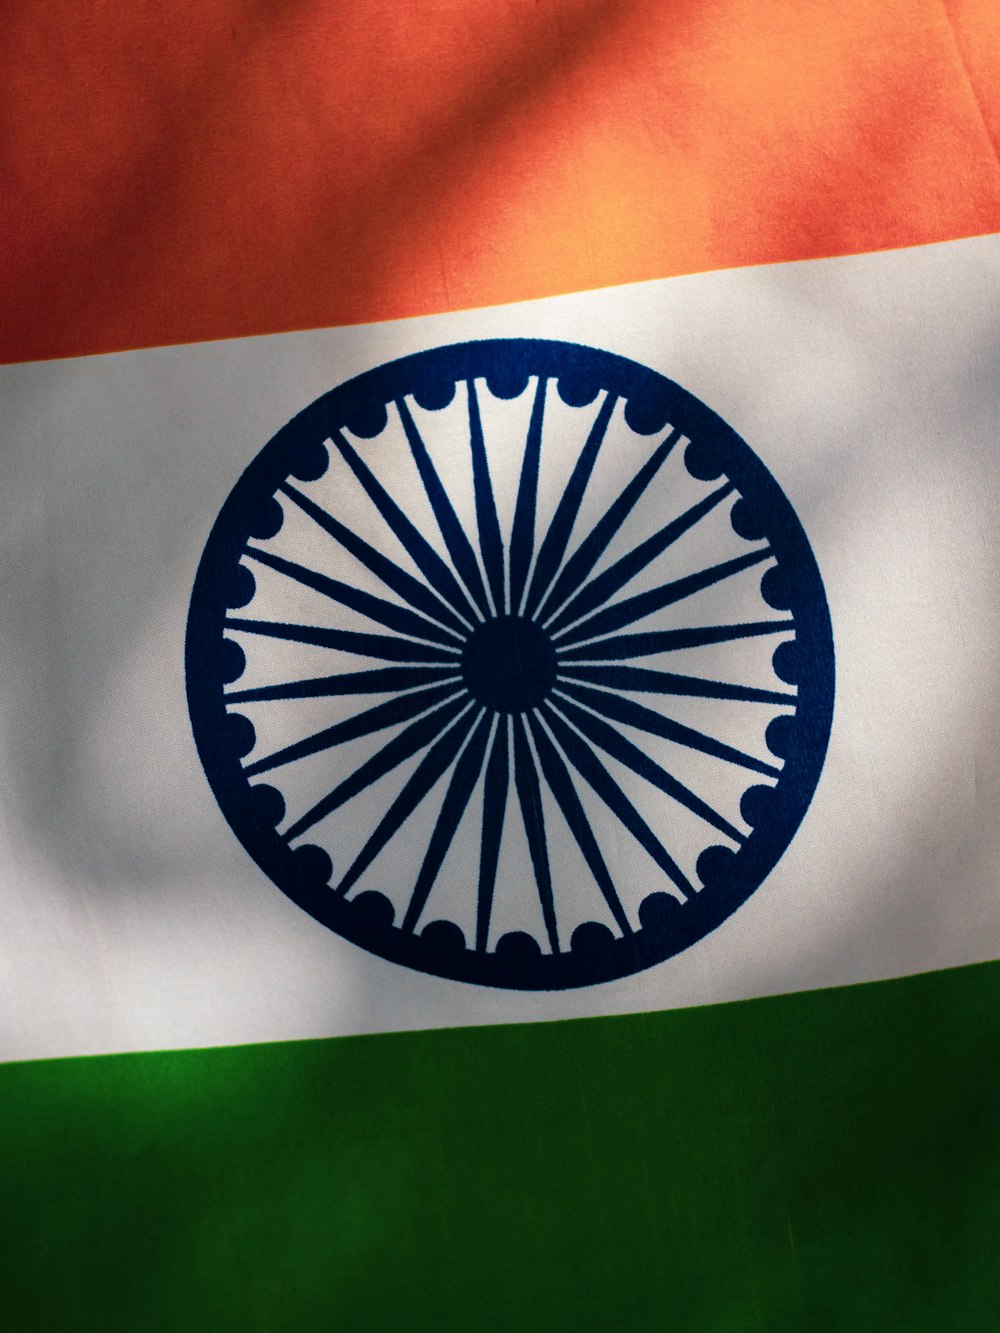 a close up of the flag of india